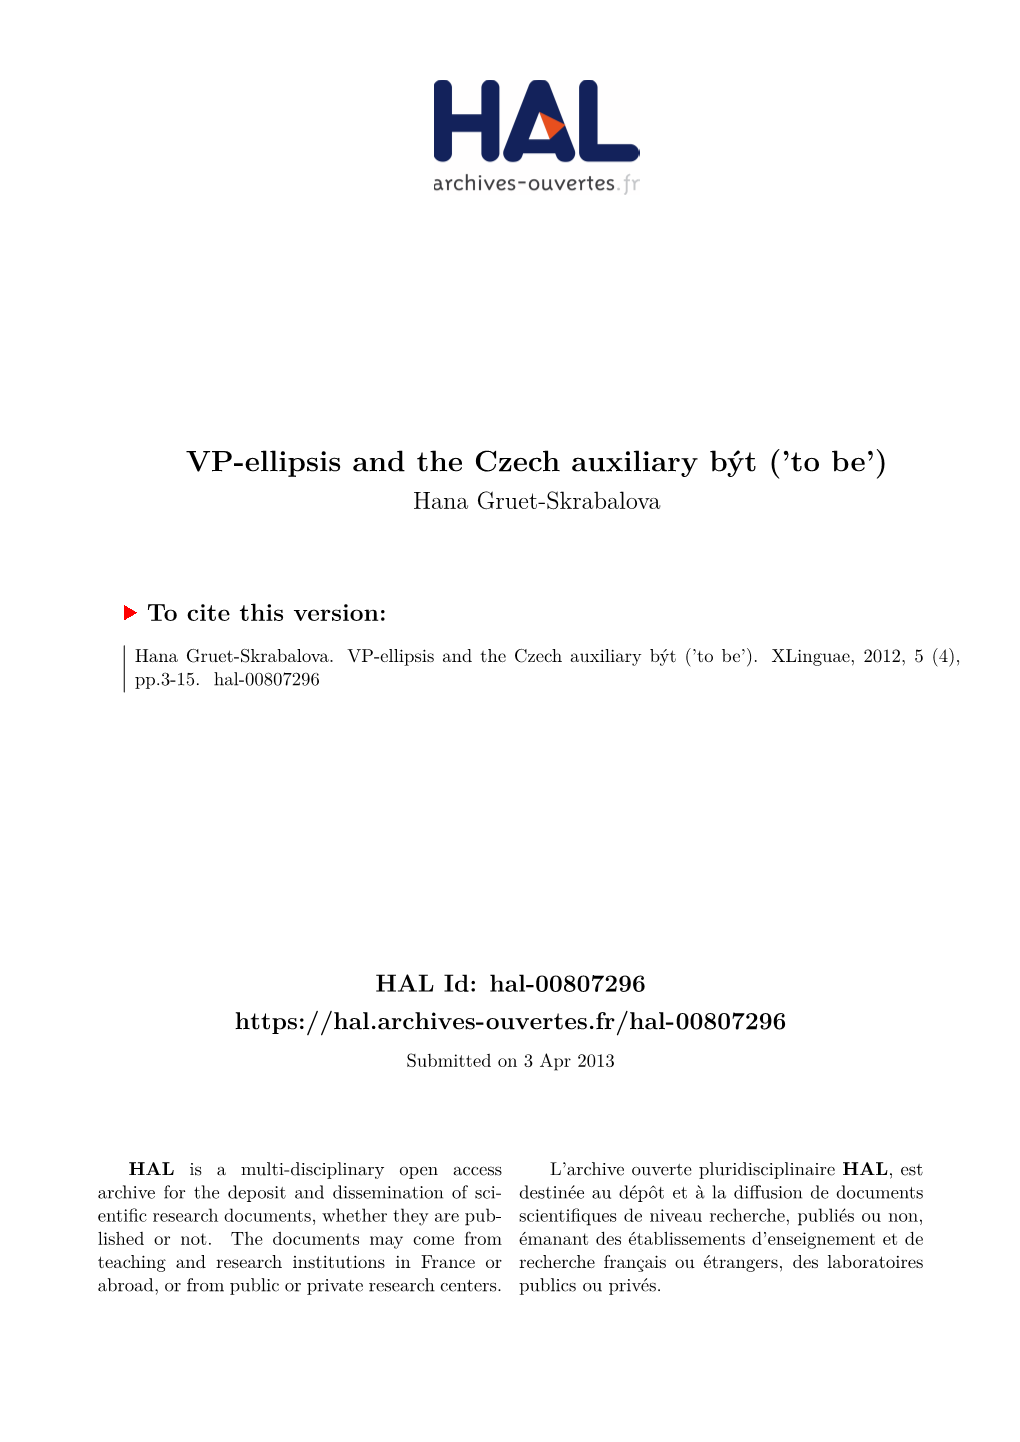 VP-Ellipsis and the Czech Auxiliary Být ('To Be')